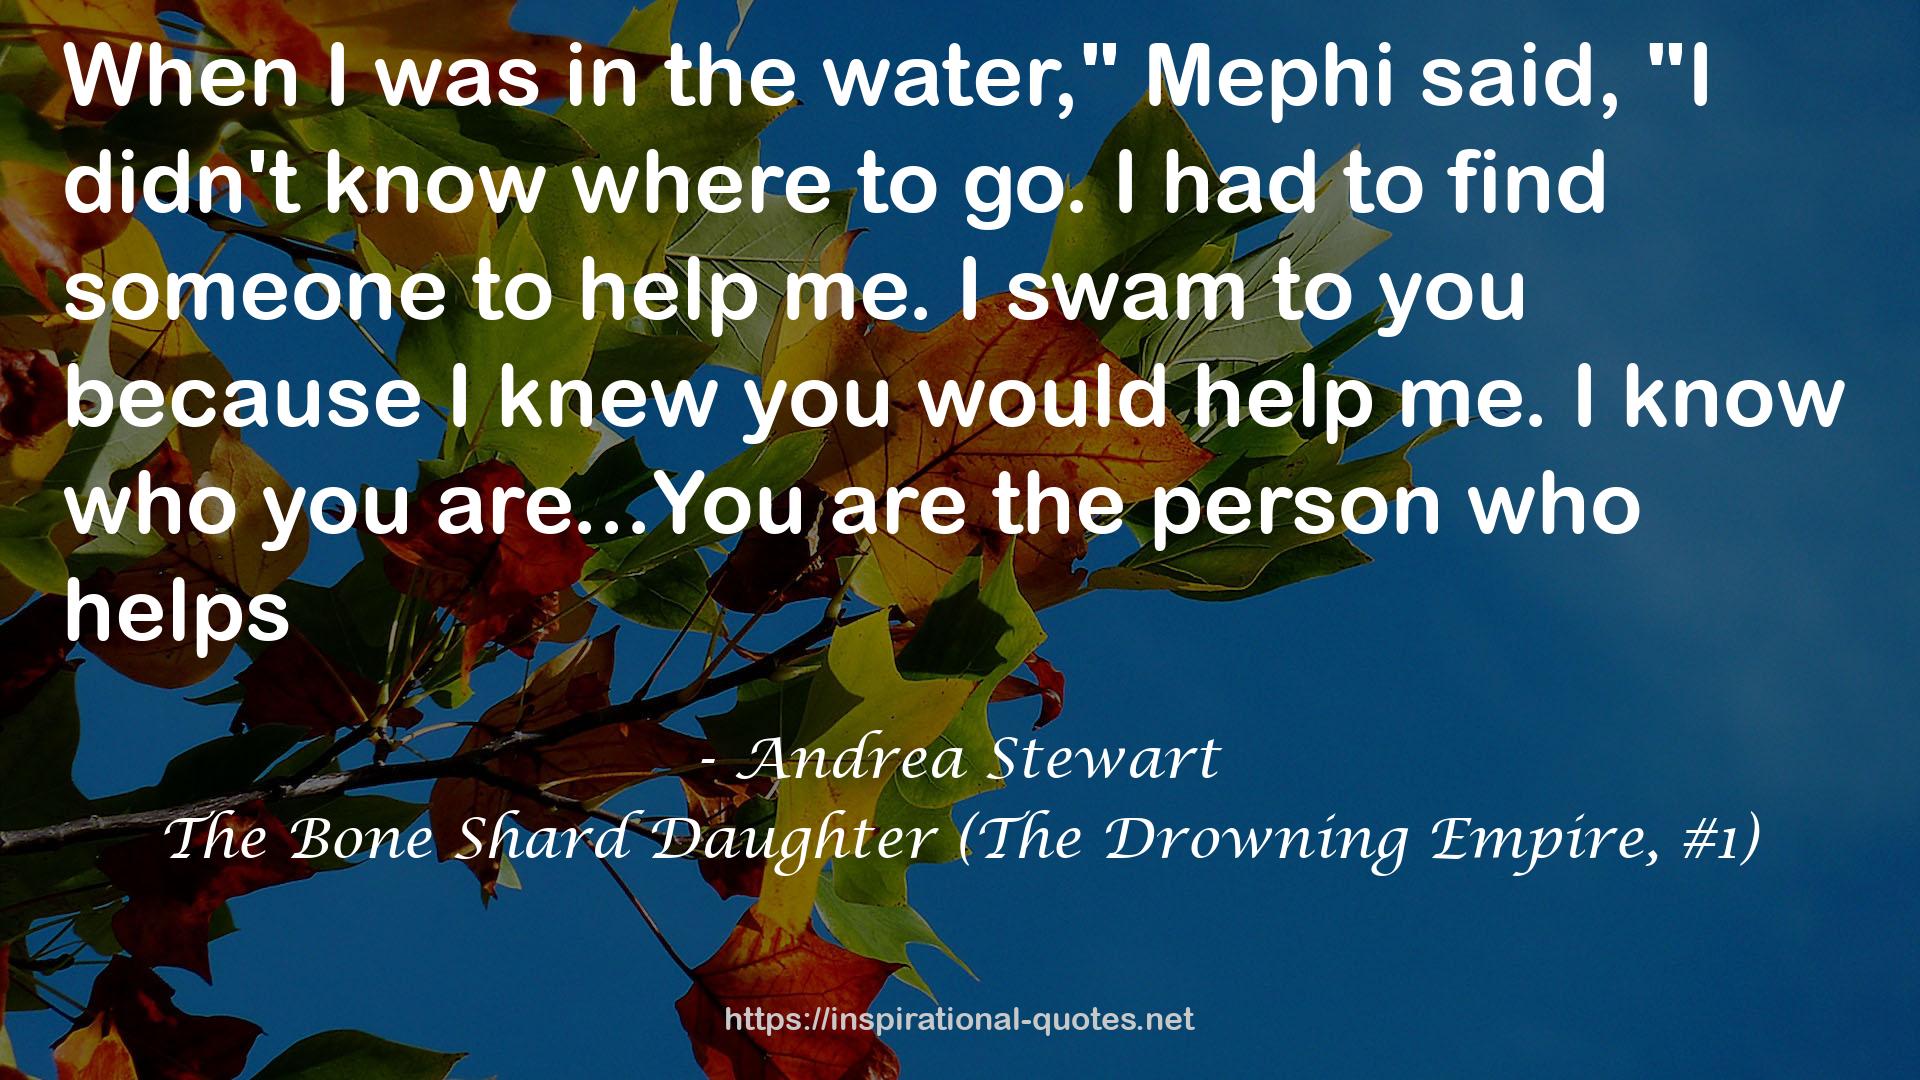 The Bone Shard Daughter (The Drowning Empire, #1) QUOTES